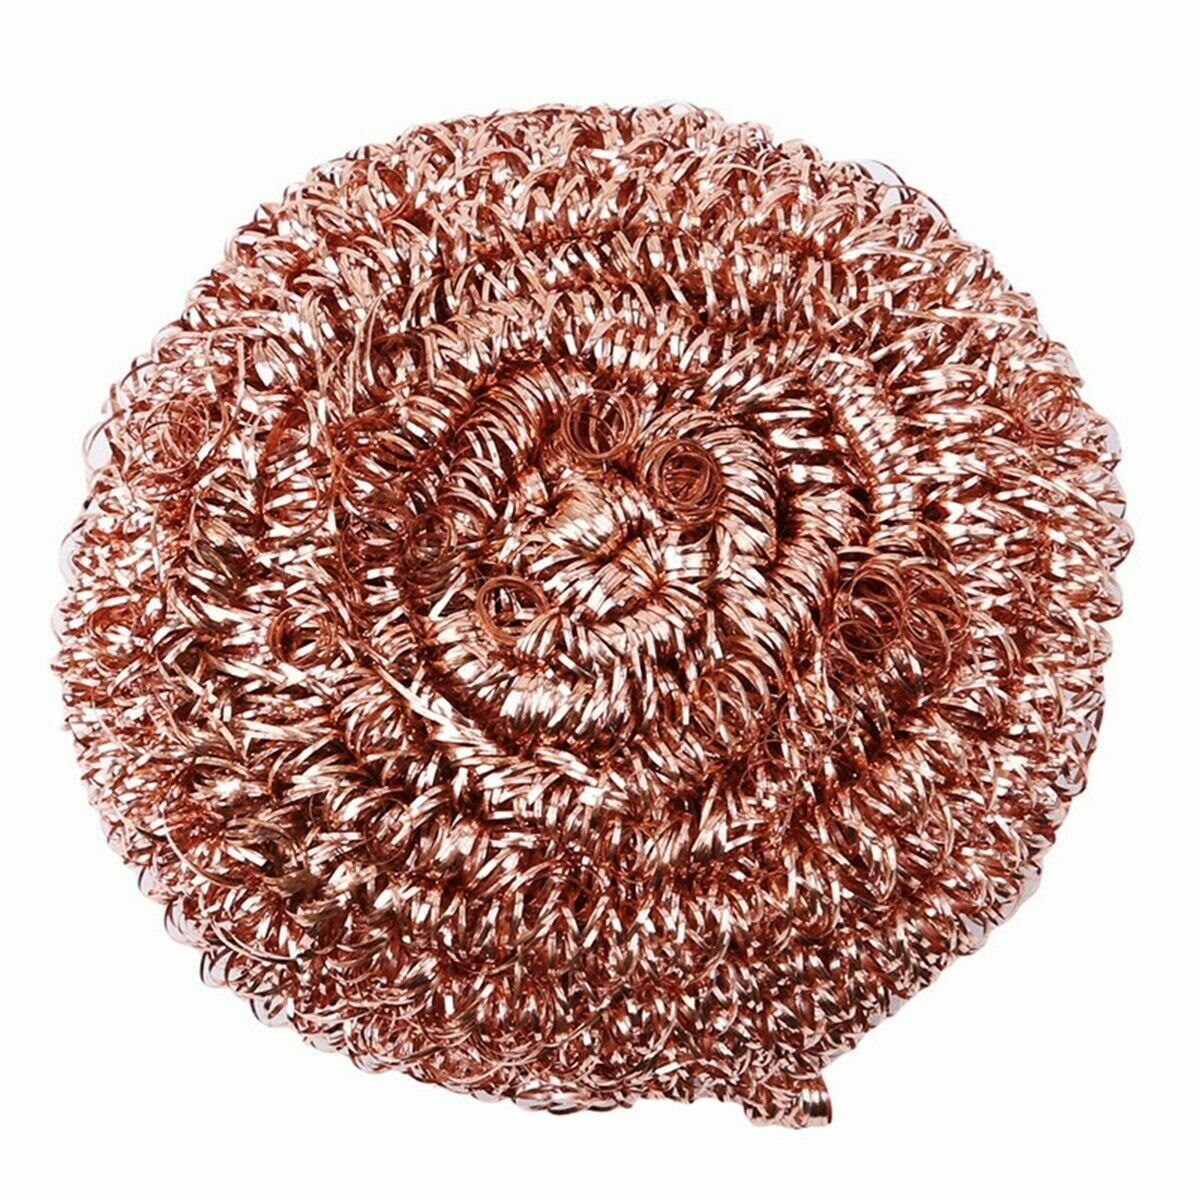 Where to Buy Copper Scourers